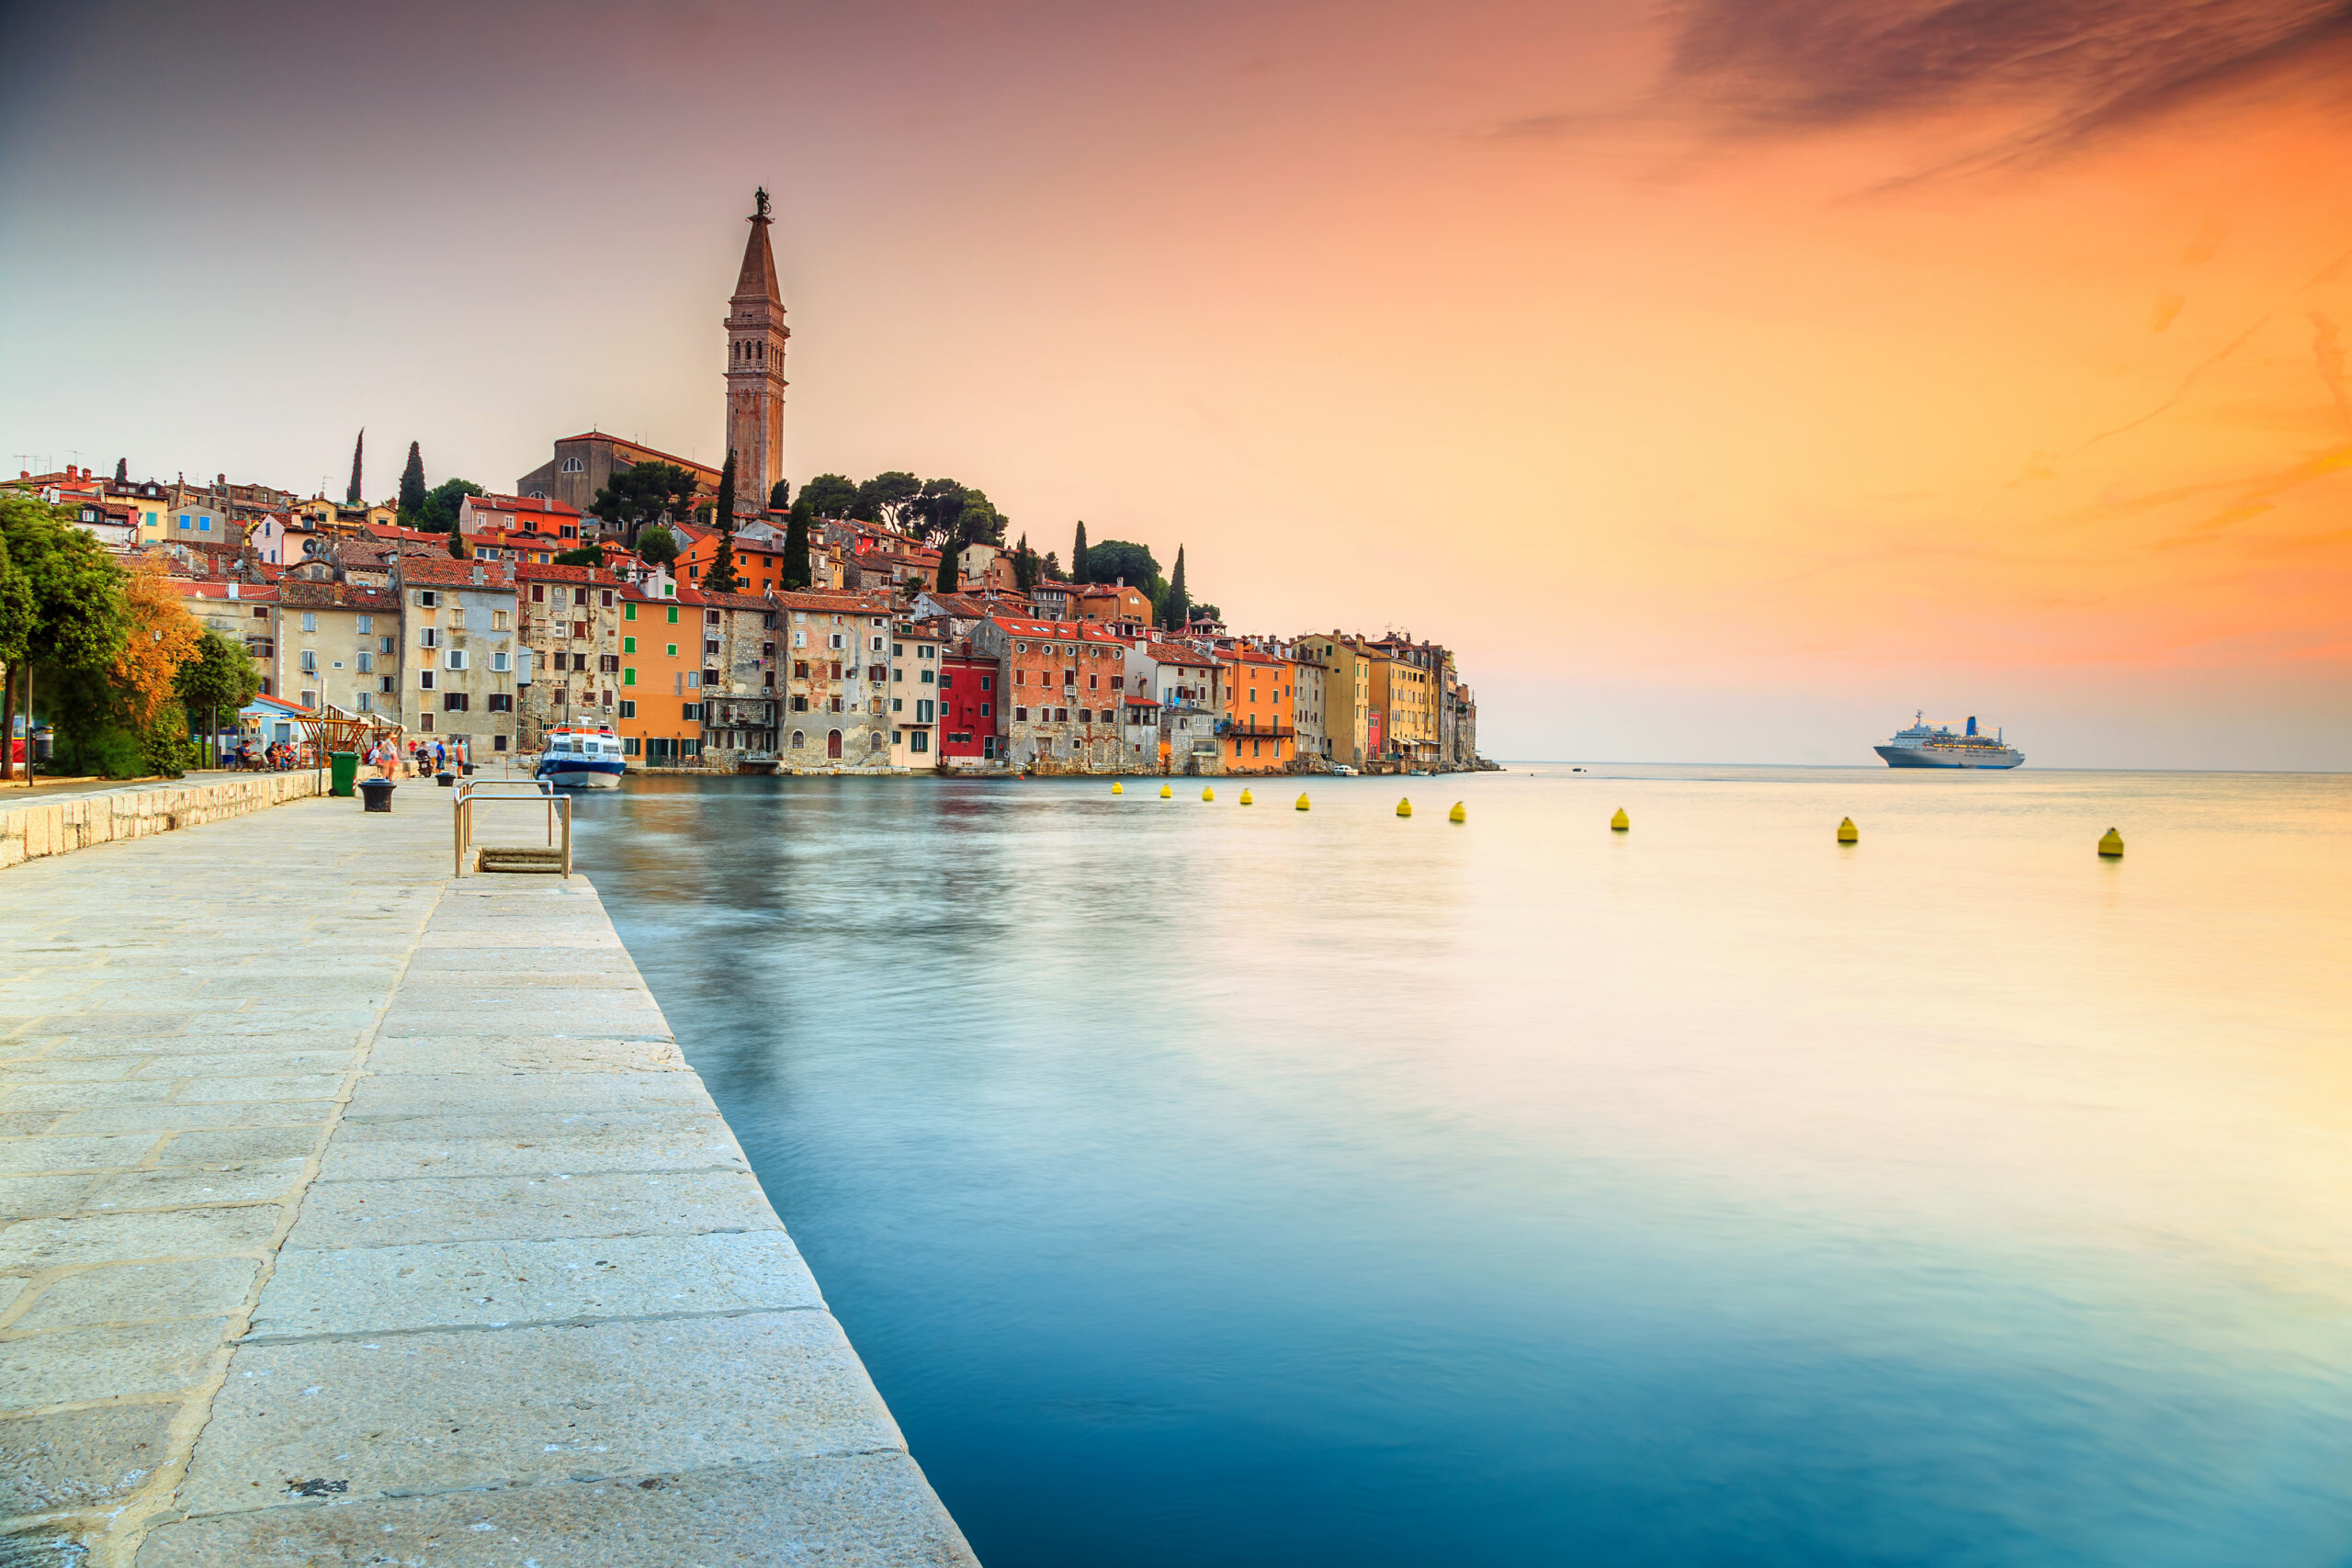 Famous romantic promenade with beautiful old town and magical sunset on peninsula.